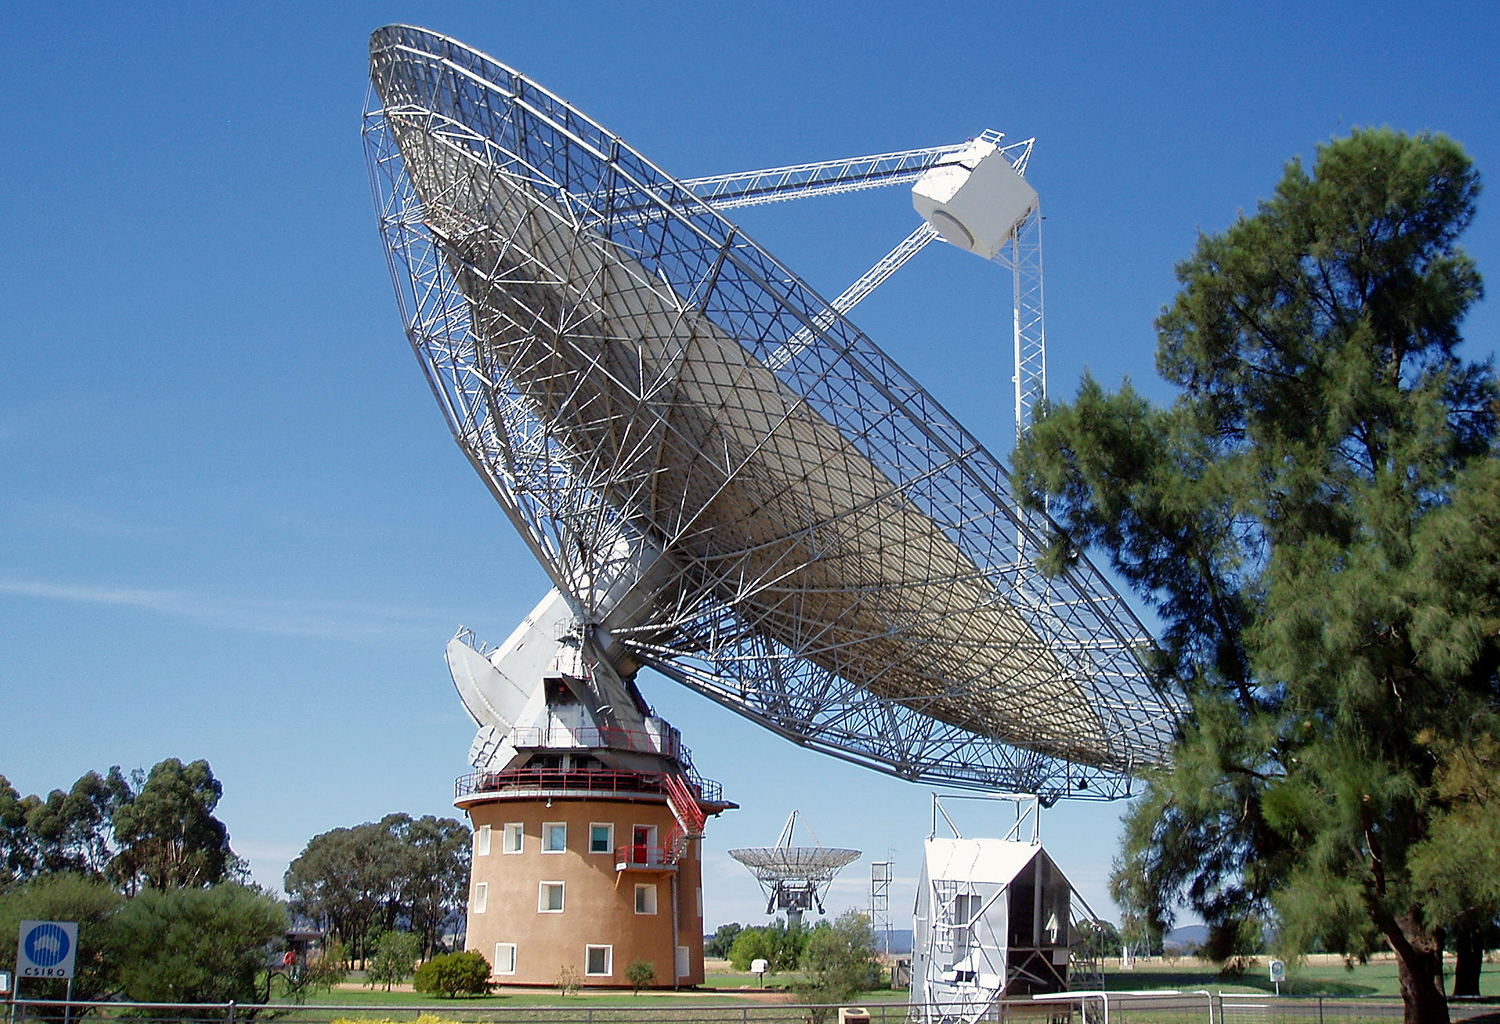 Crane your neck at a piece of space history at the CSIRO Parkes Radio Telescope in New South Wales. Image by Amanda Slater / CC BY-SA 2.0